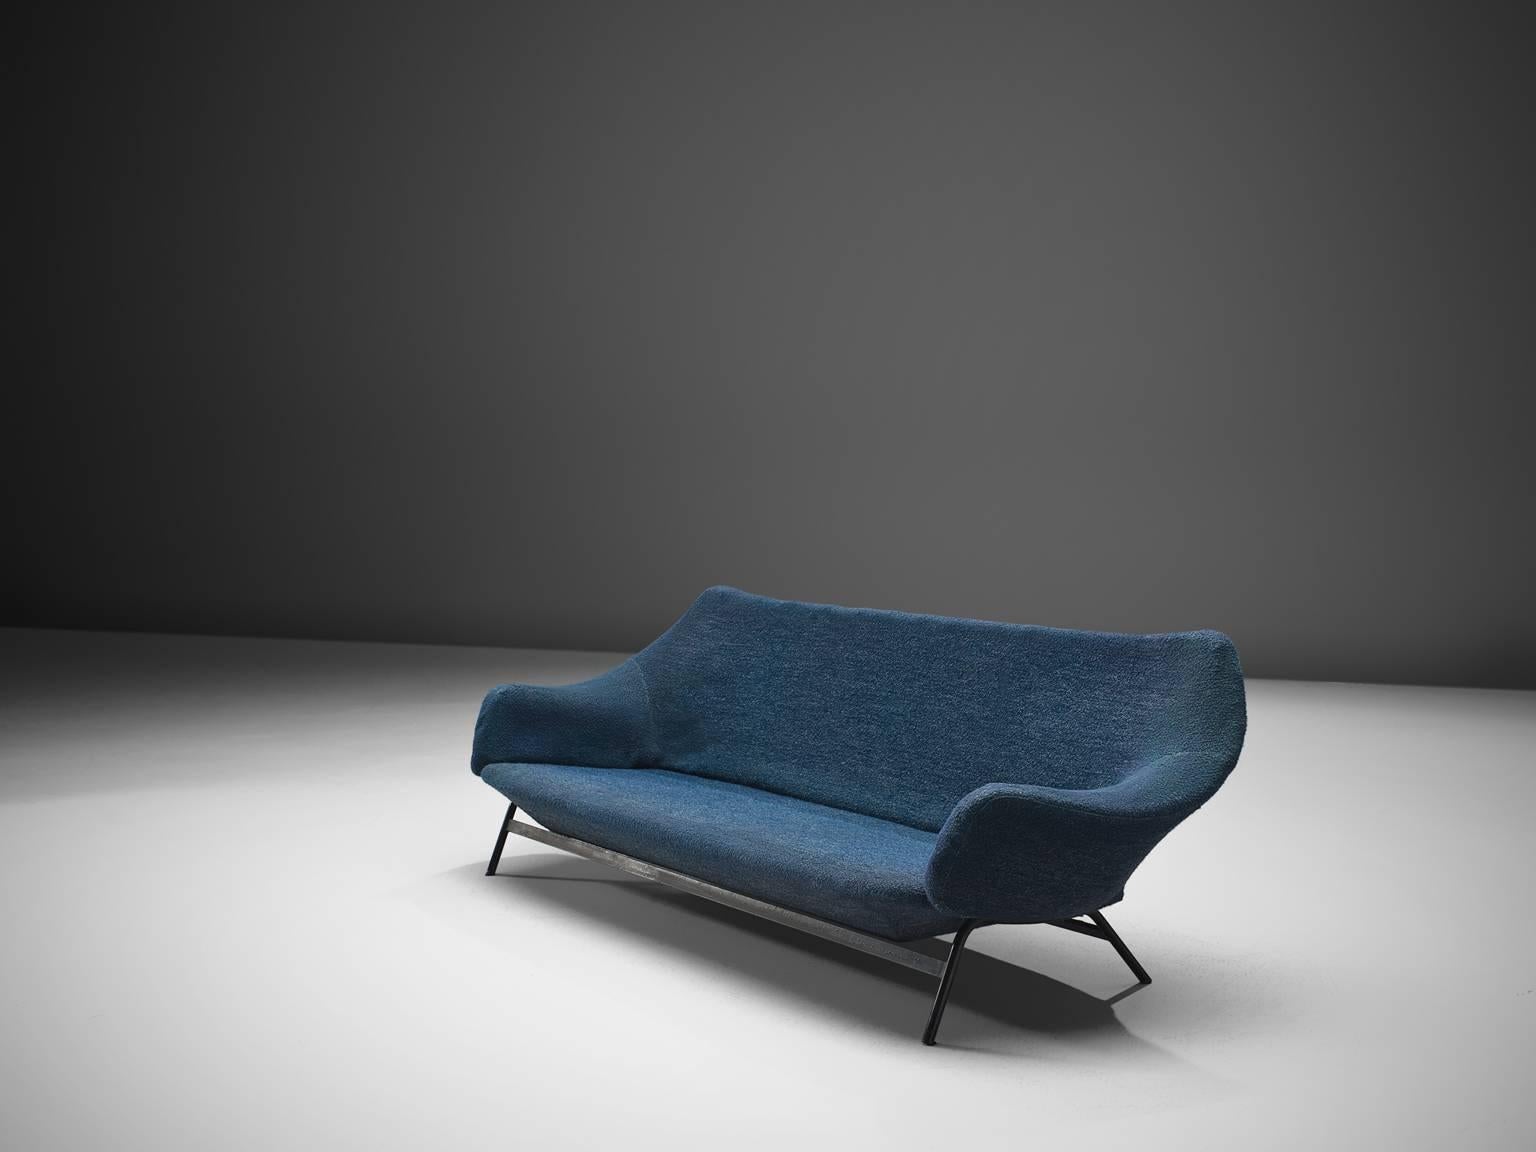 Sofa, blue fabric and black coated metal, Italy, 1950s.

This is Italian sofa is upholstered with a sea blue fabric. Designed and made in Italy in the style of Augusto Bozzi. Elegant organic shaped settee in blue upholstery, made with nicely shaped